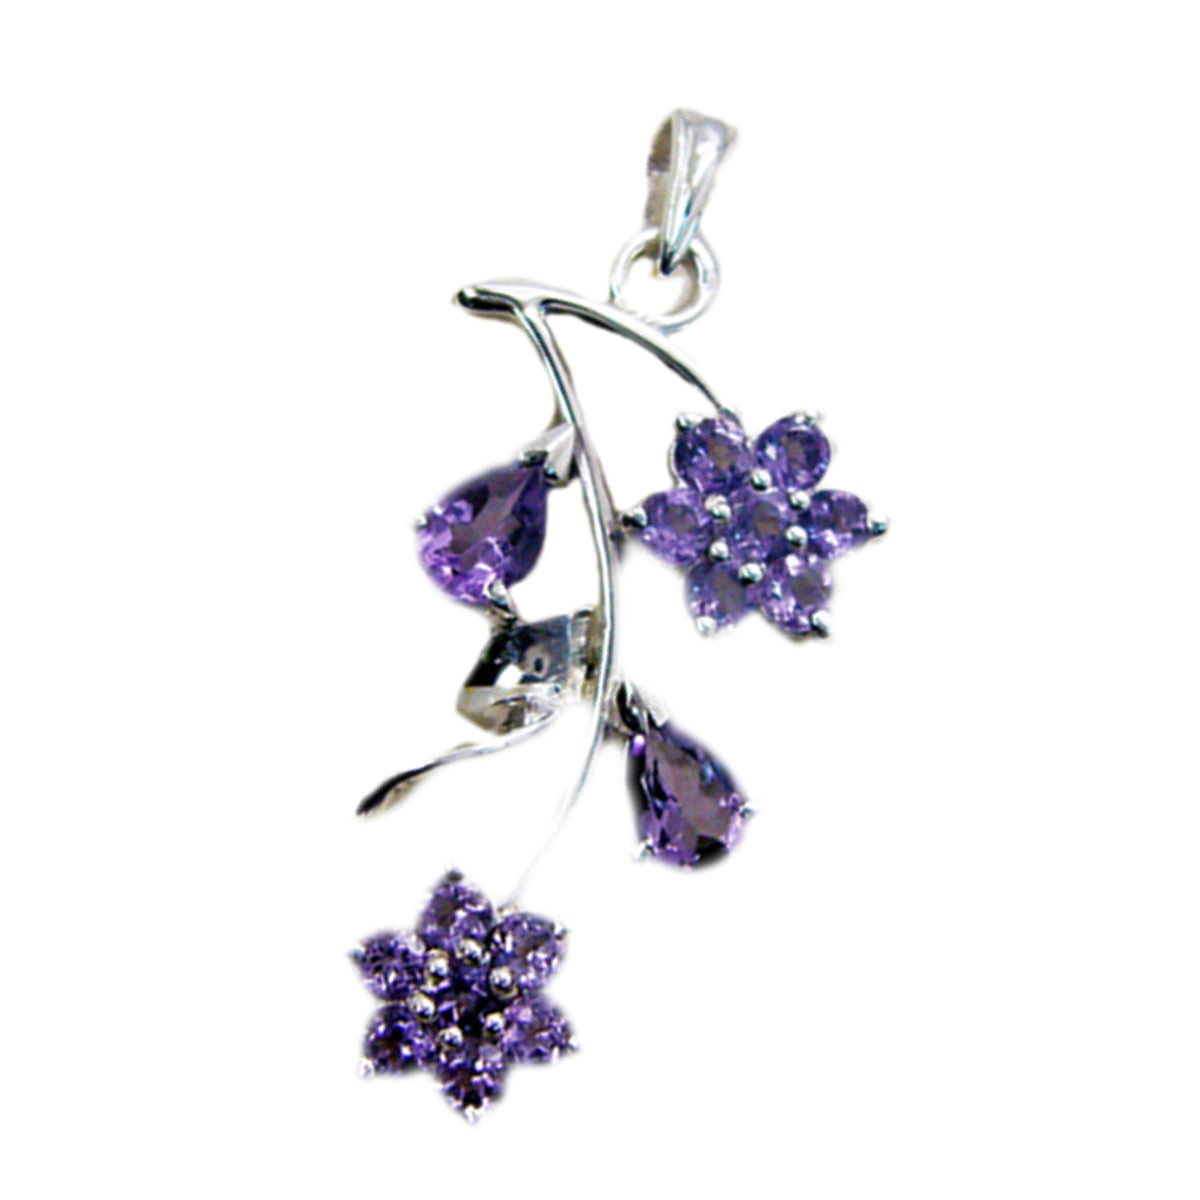 Riyo Spunky Gems Multi Faceted Purple Amethyst Solid Silver Pendant Gift For Anniversary